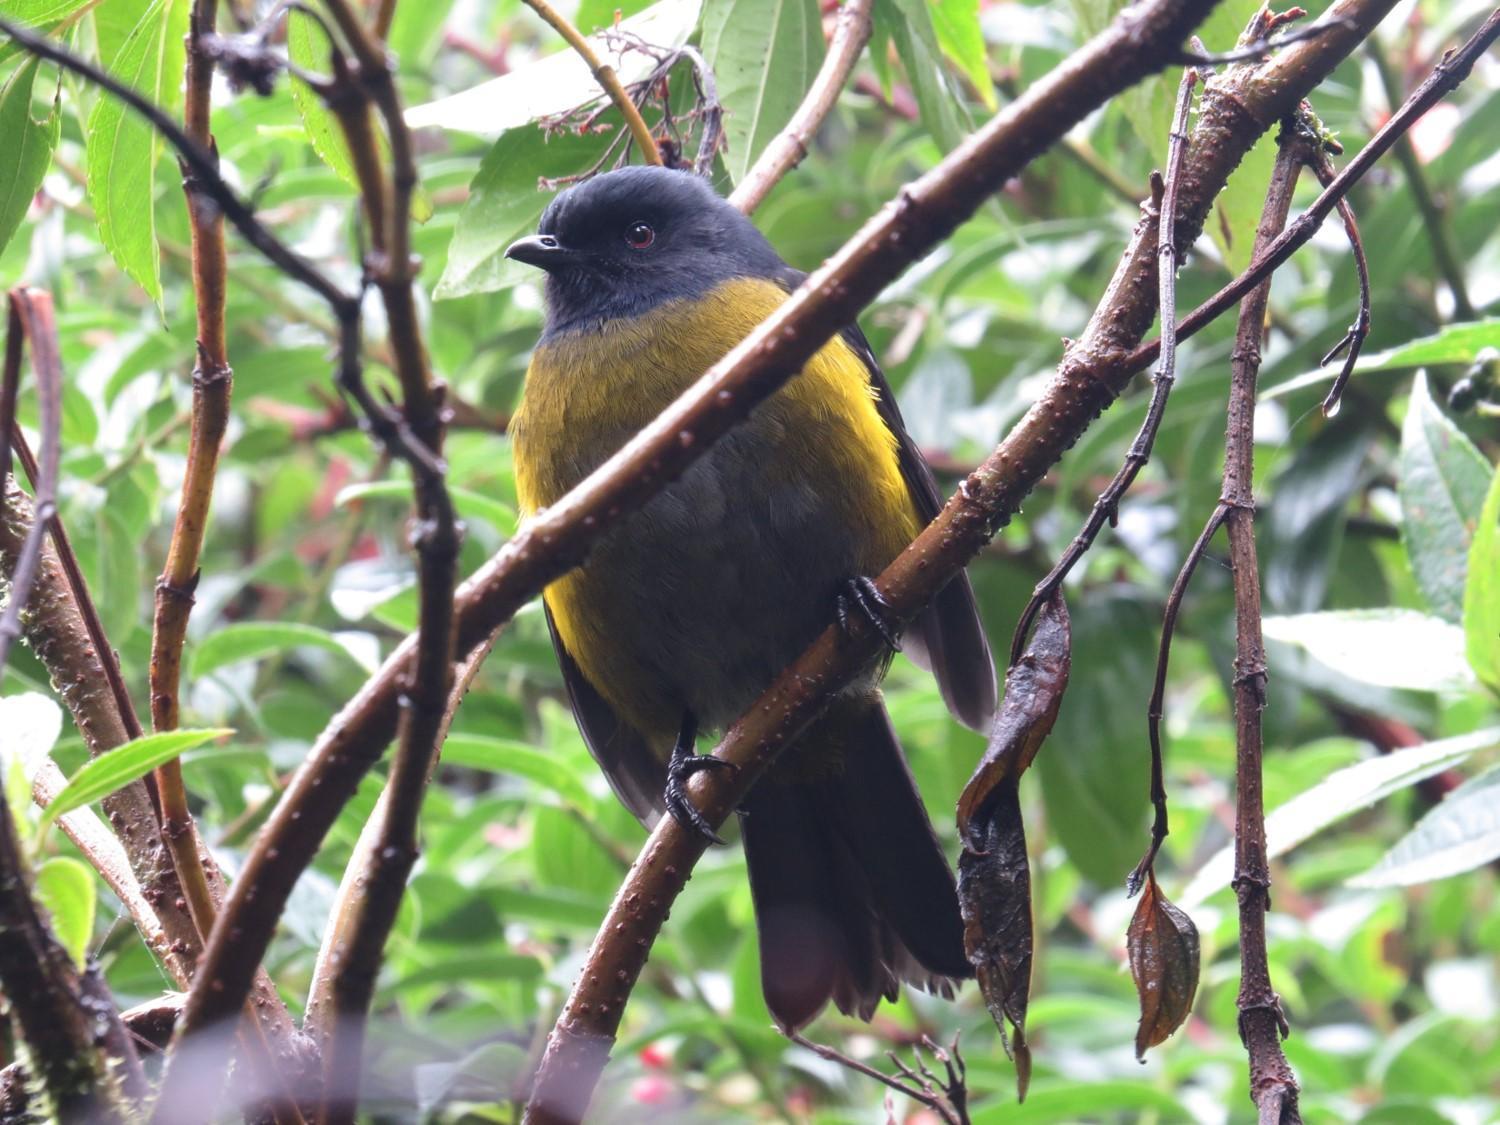 Black-and-yellow Silky-flycatcher Photo by Seth Inman